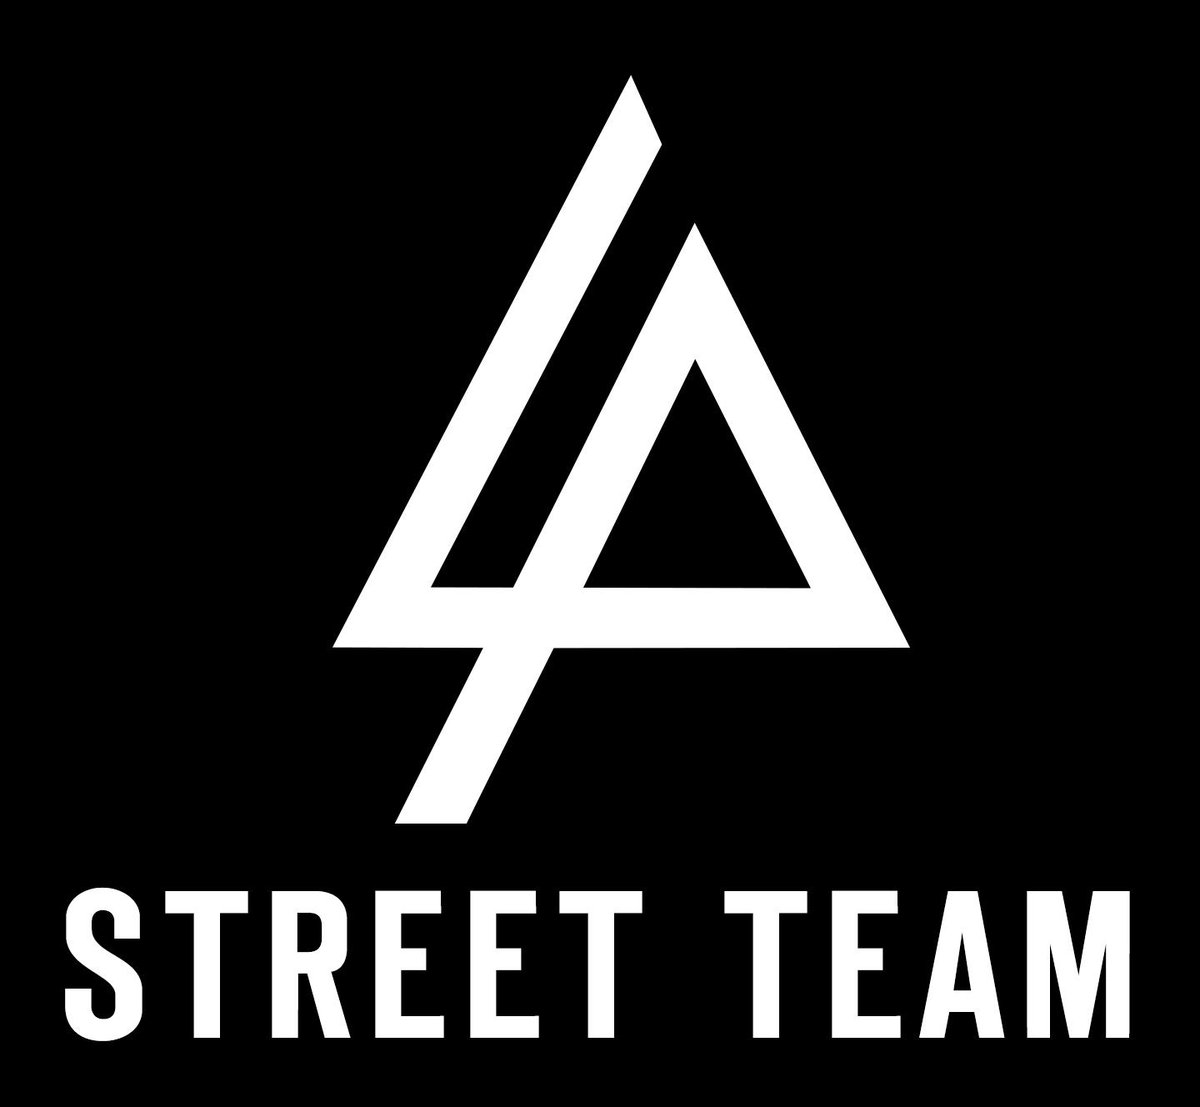 RT @LPSTofficial: Join the new @LinkinPark Street Team here: http://t.co/bACC70684O http://t.co/b6os0EP6e0